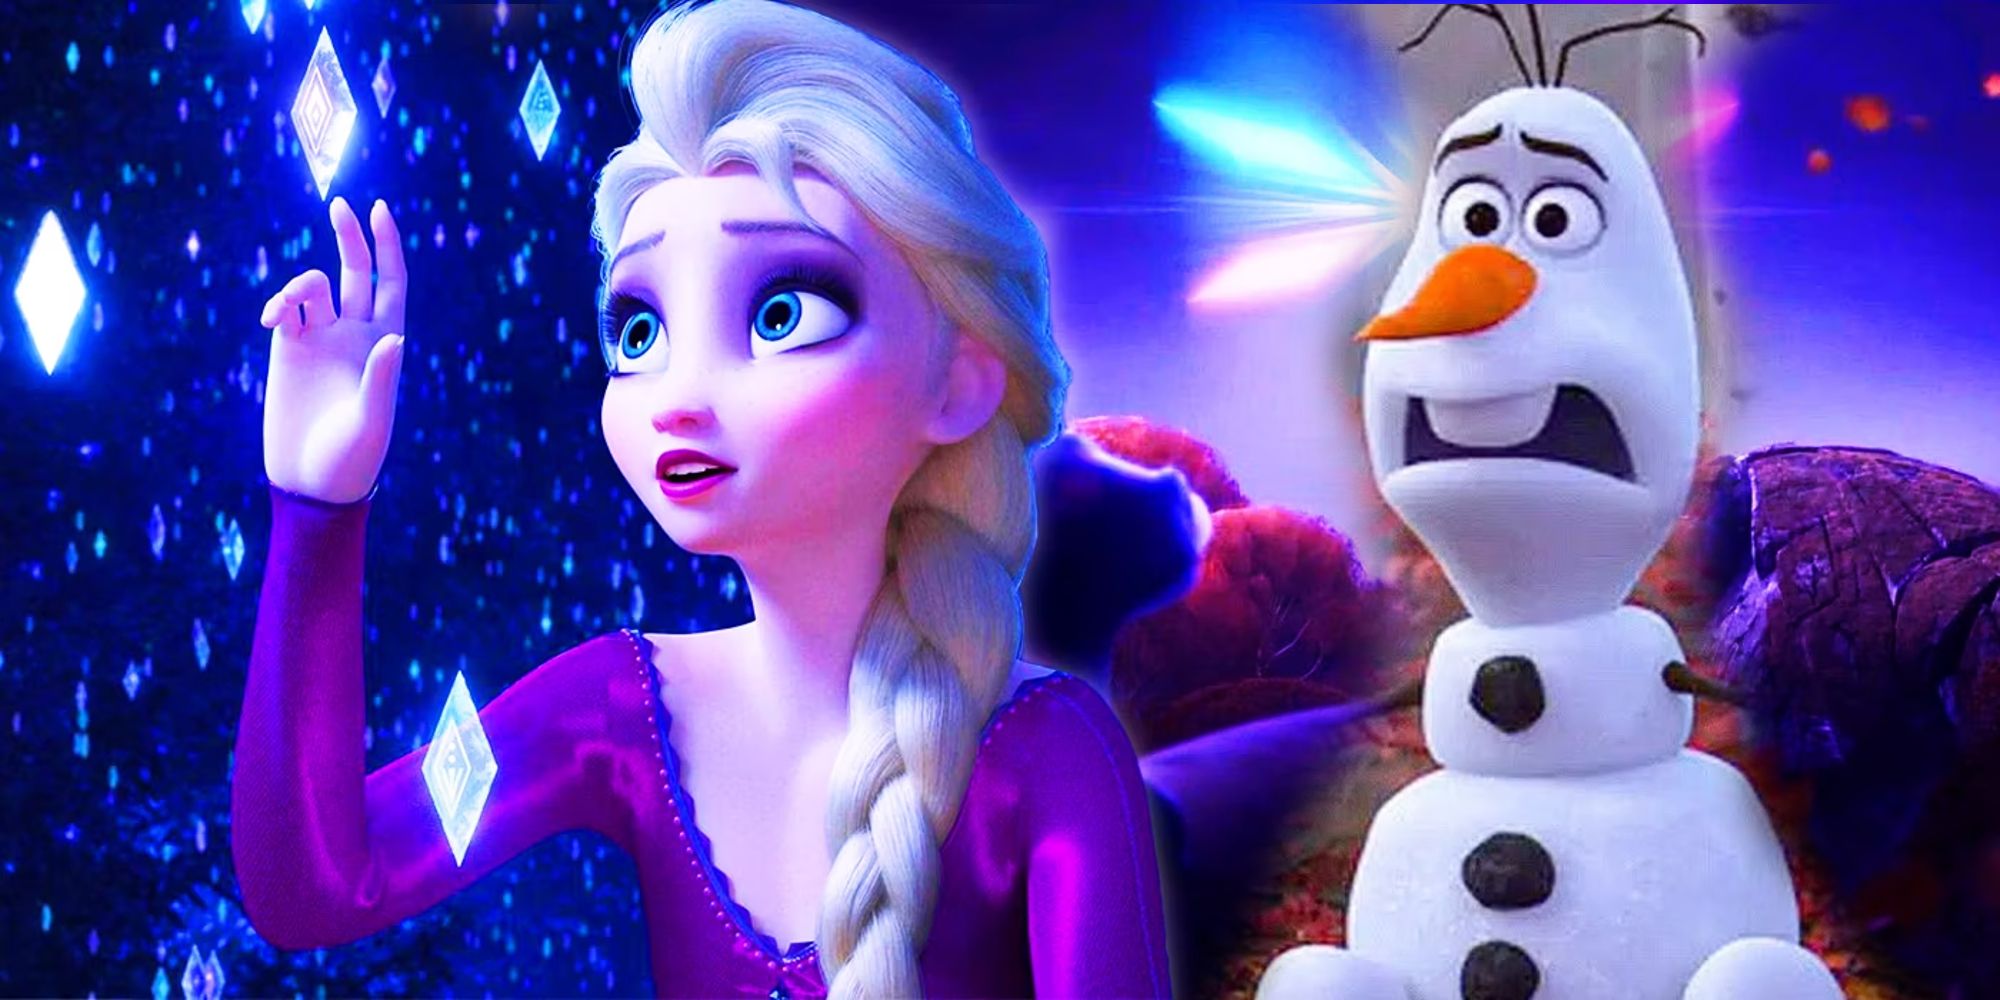 Custom image of Elsa and elements and Olaf in Frozen